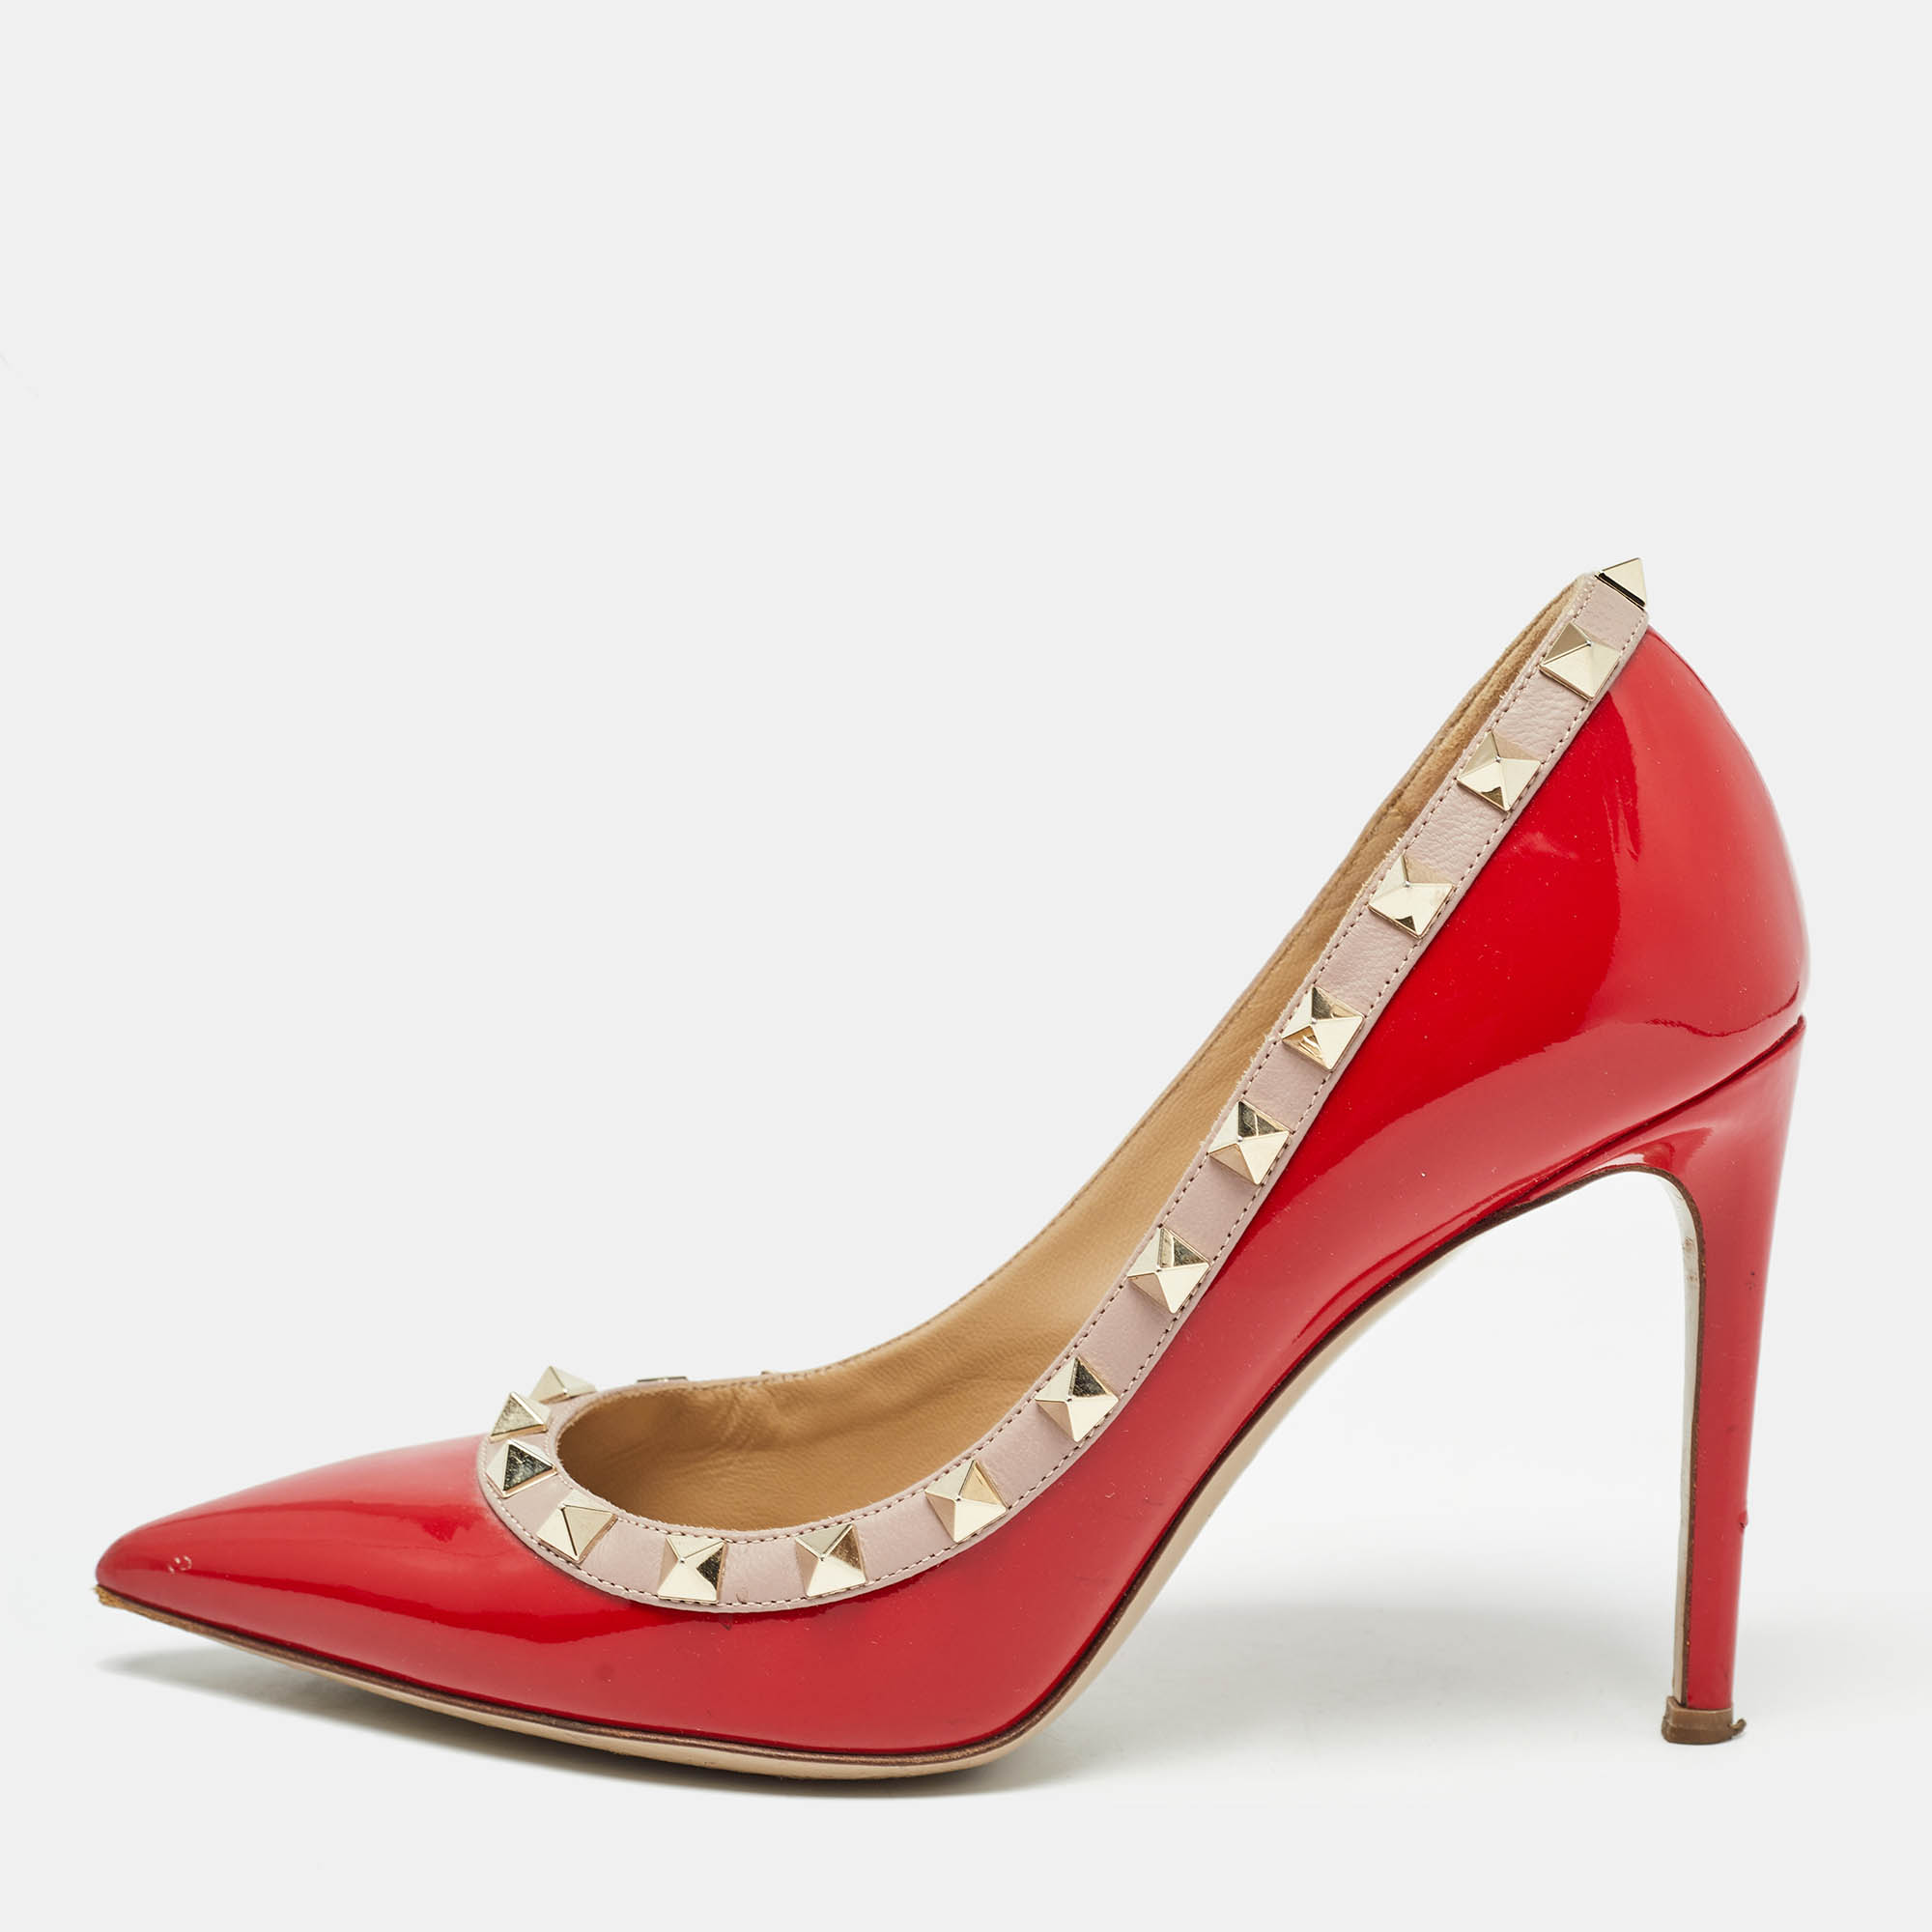 Valentino red patent leather rockstud pumps size 36